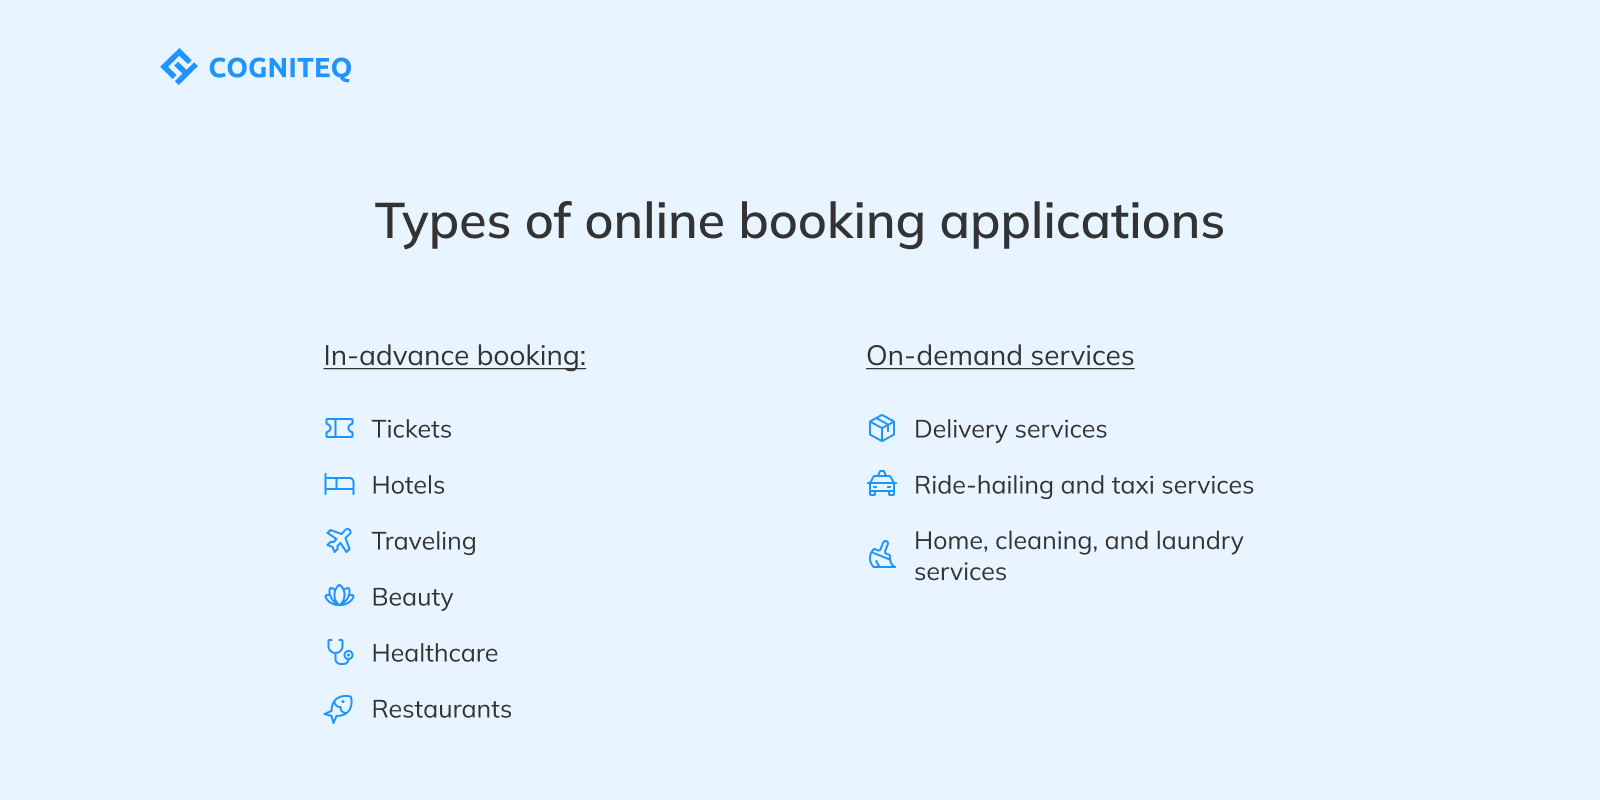 Types of online booking applications